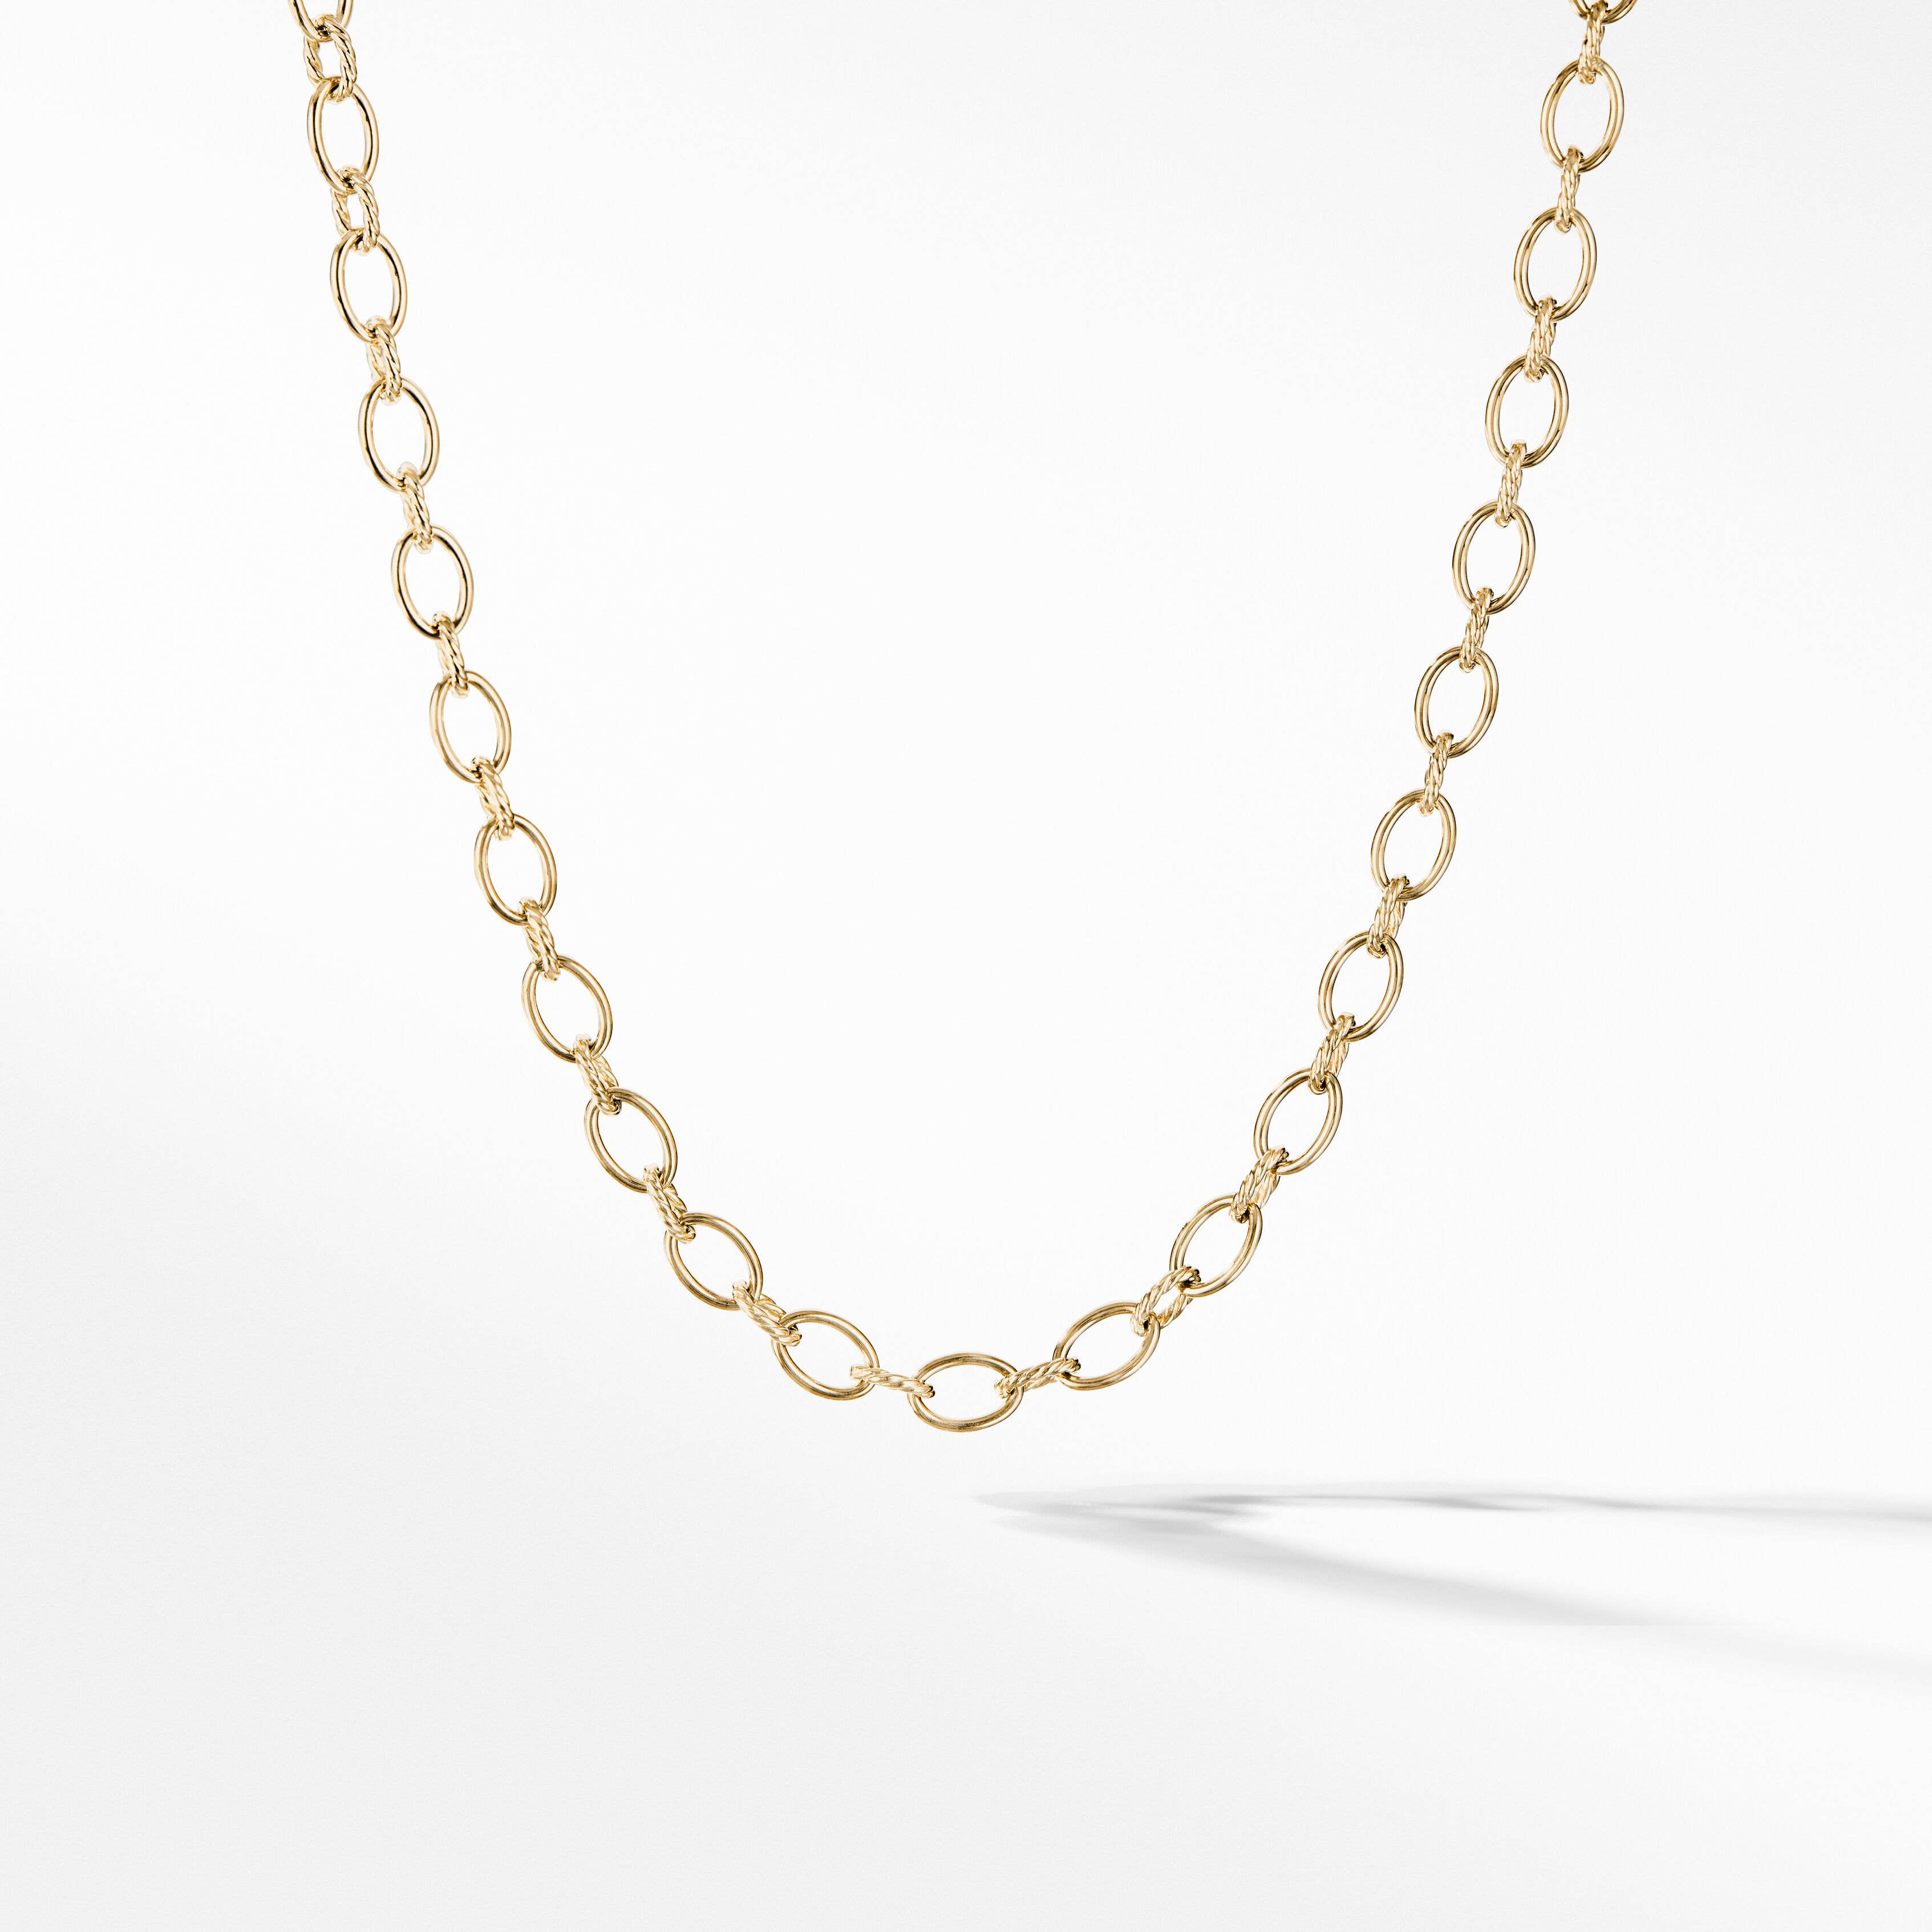 Oval and Cable Link Chain Necklace in 18K Yellow Gold